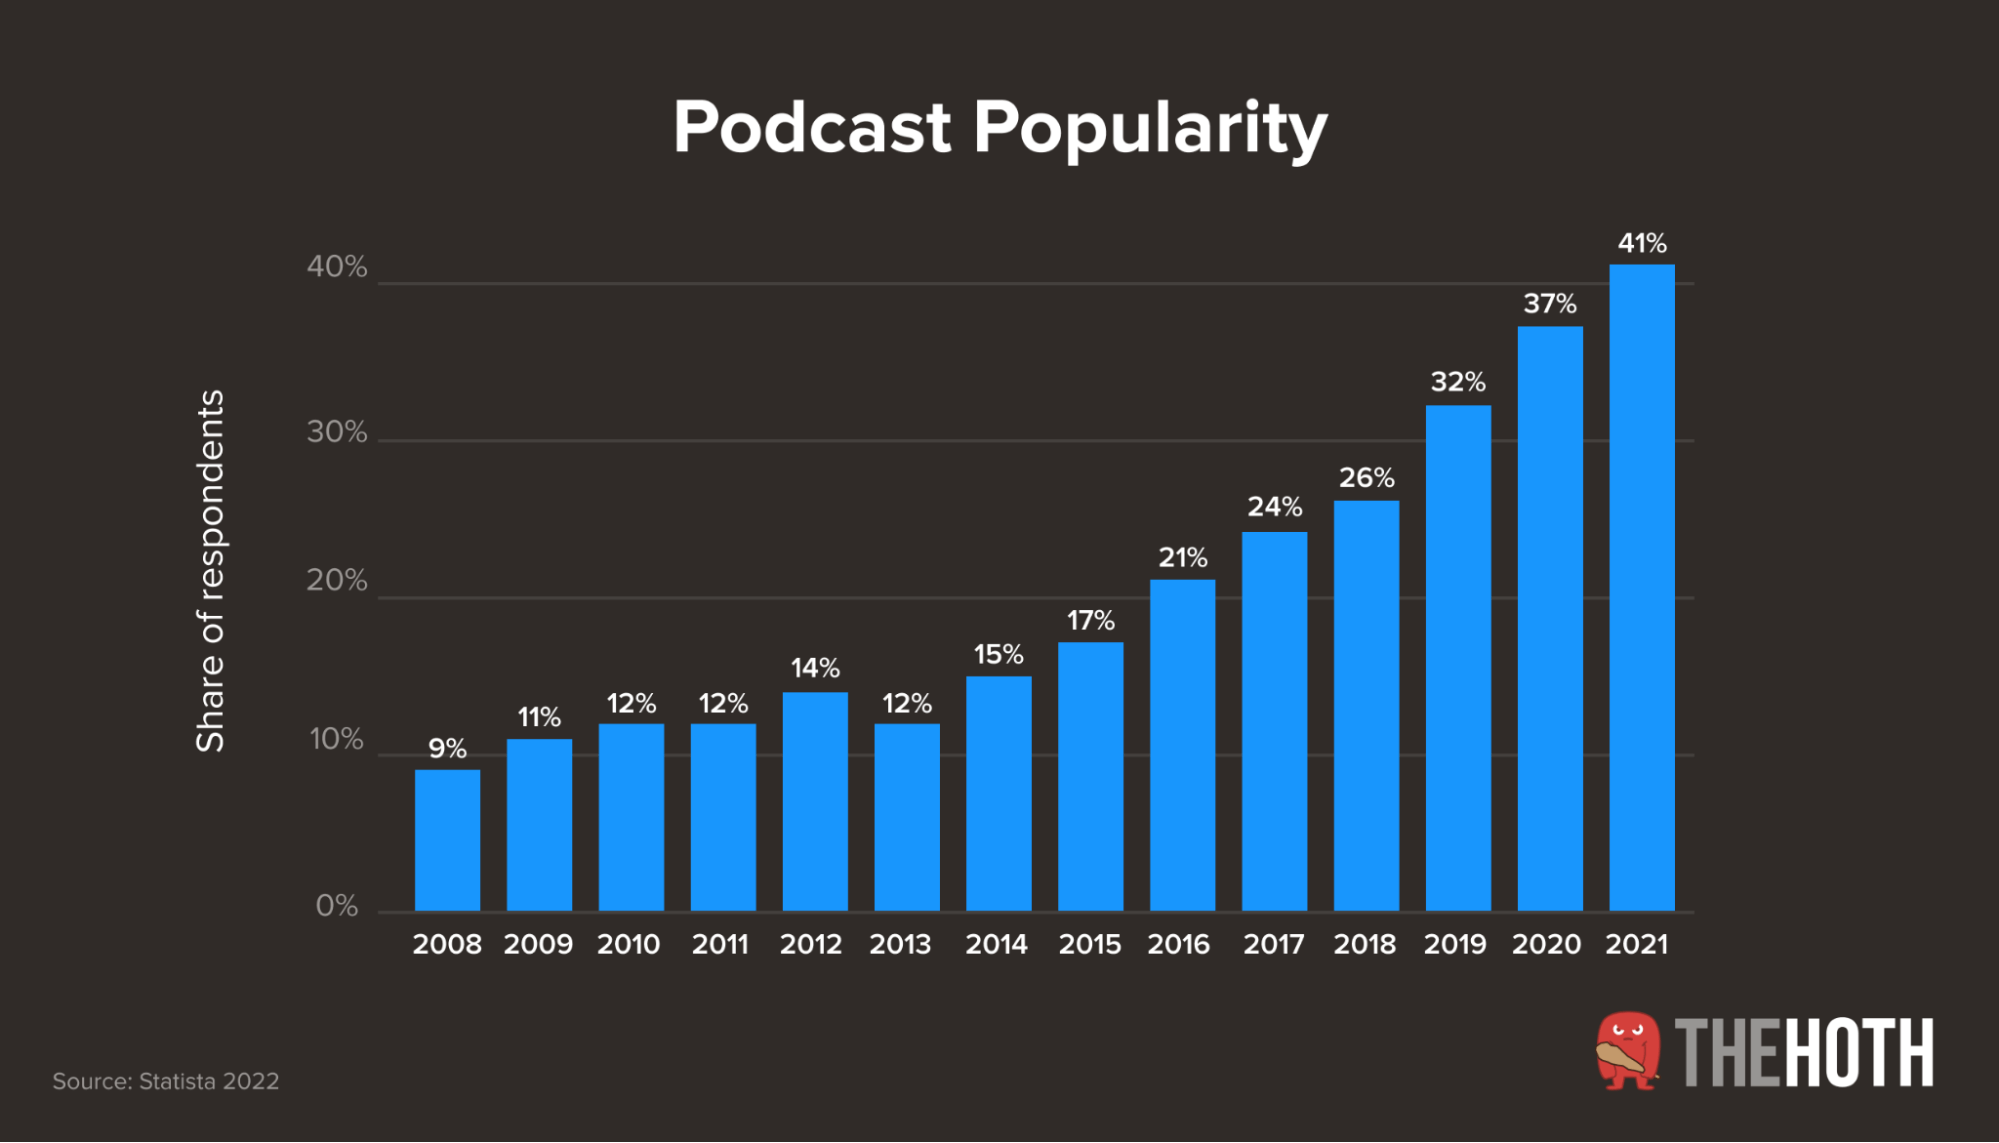 Growing popularity of podcasts among U.S. adults